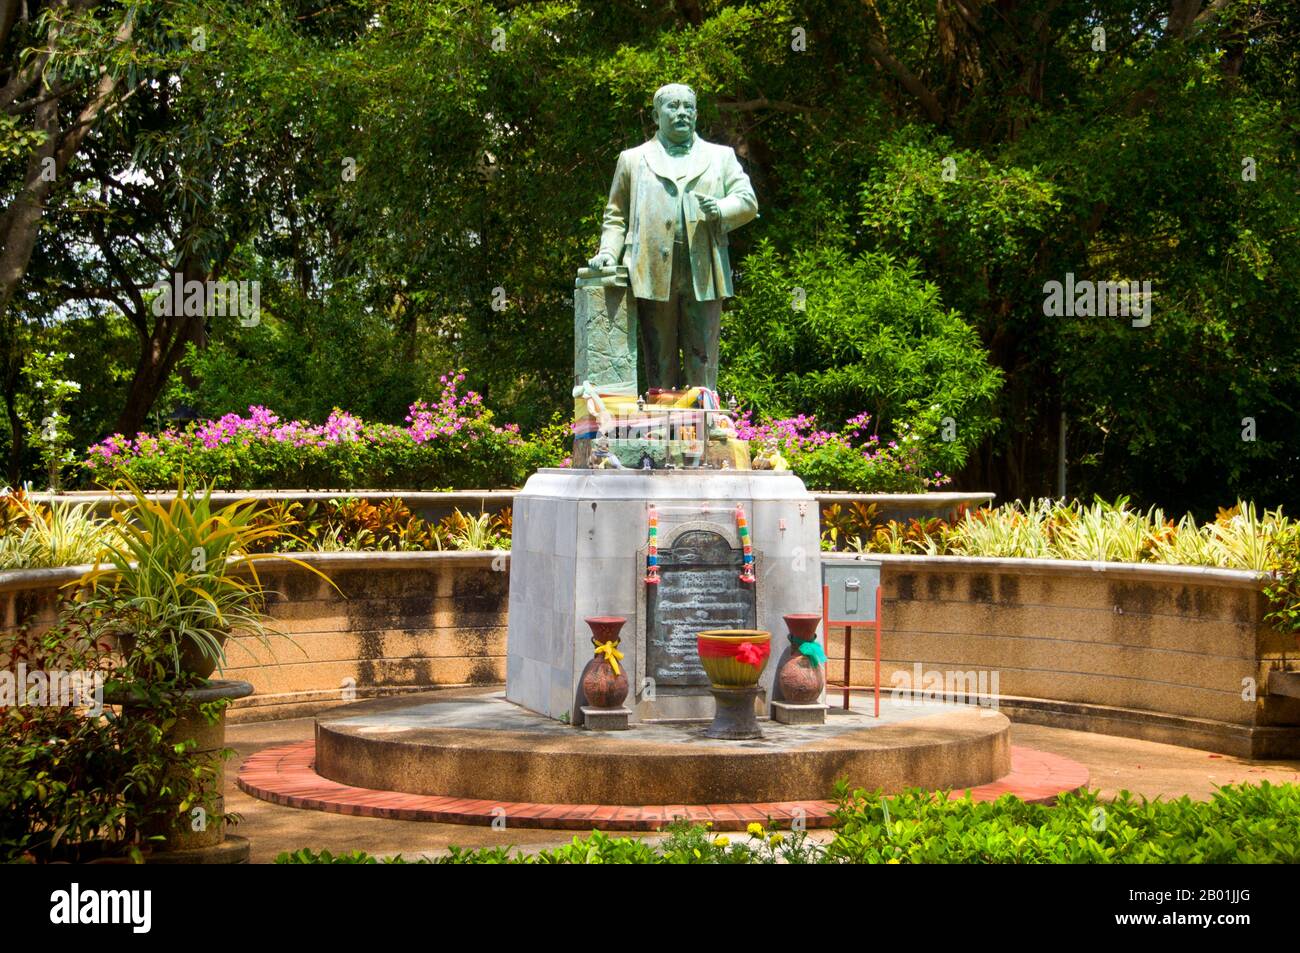 Thailand: Khaw Sim Bee (8 April 1857 - 10 Apri 1916), early 20th century Governor of Phuket, Khao Rang (Rang Hill), Phuket Town.  Khaw Sim Bee, also known as Phraya Ratsadanupradit Mahison Phakdi, was governor of Phuket from 1902 until his death in 1916. He is believed to have been the first man to introduce the rubber tree to Thailand.  Phuket, formerly known as Talang and, in Western sources, Junk Ceylon (a corruption of the Malay Tanjung Salang, i.e. 'Cape Salang'), is one of the southern provinces of Thailand. Neighbouring provinces are (from north clockwise) Phang Nga and Krabi. Stock Photo